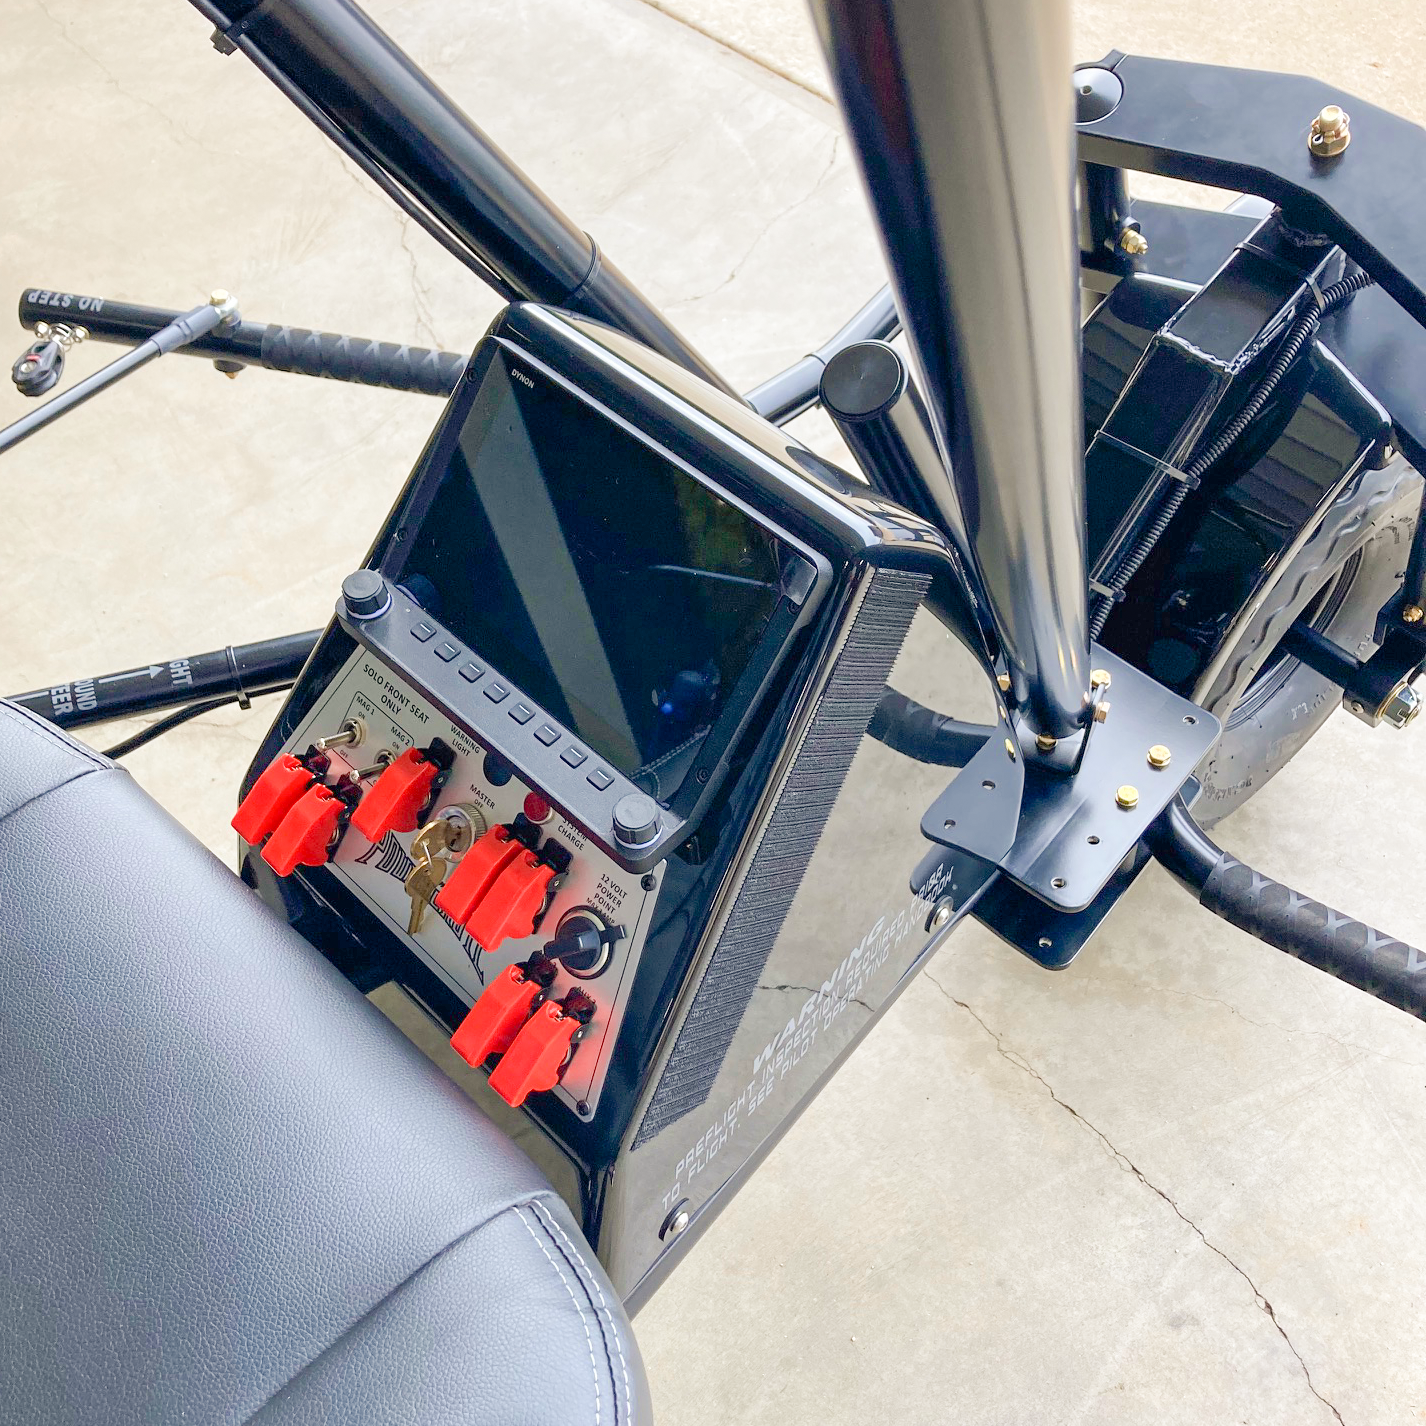 Airwolf equipped with a Dynon Skyview HDX